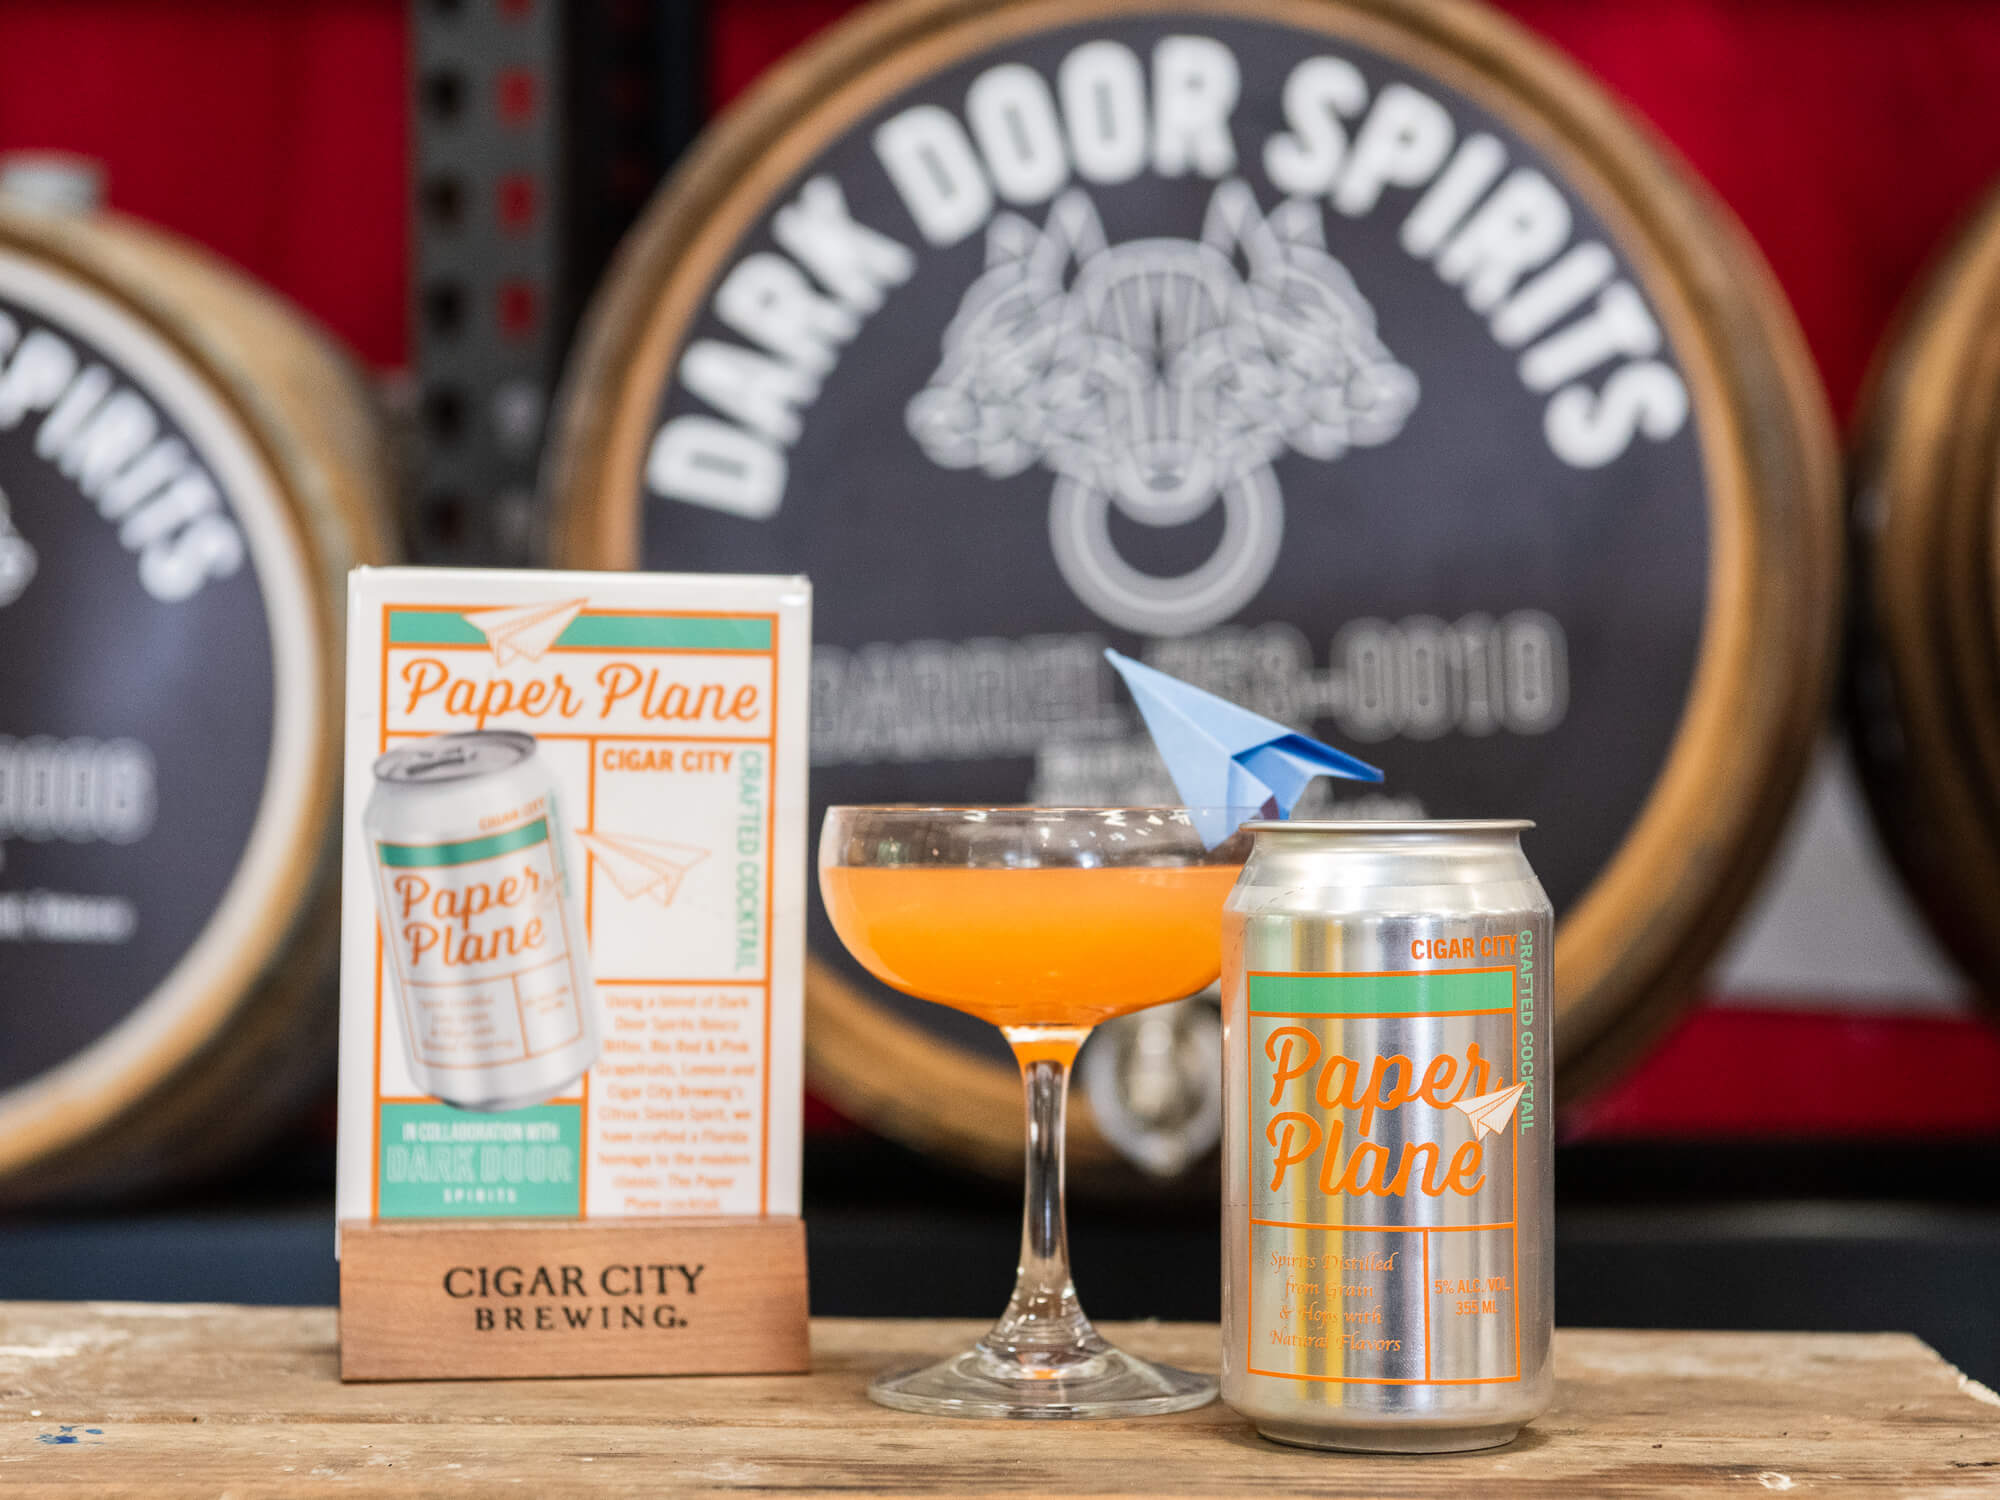 A glass of Paper Plane ready-to-drink cocktail sits next to its can in front of barrels baring the Dark Door Spirits brand imagery.